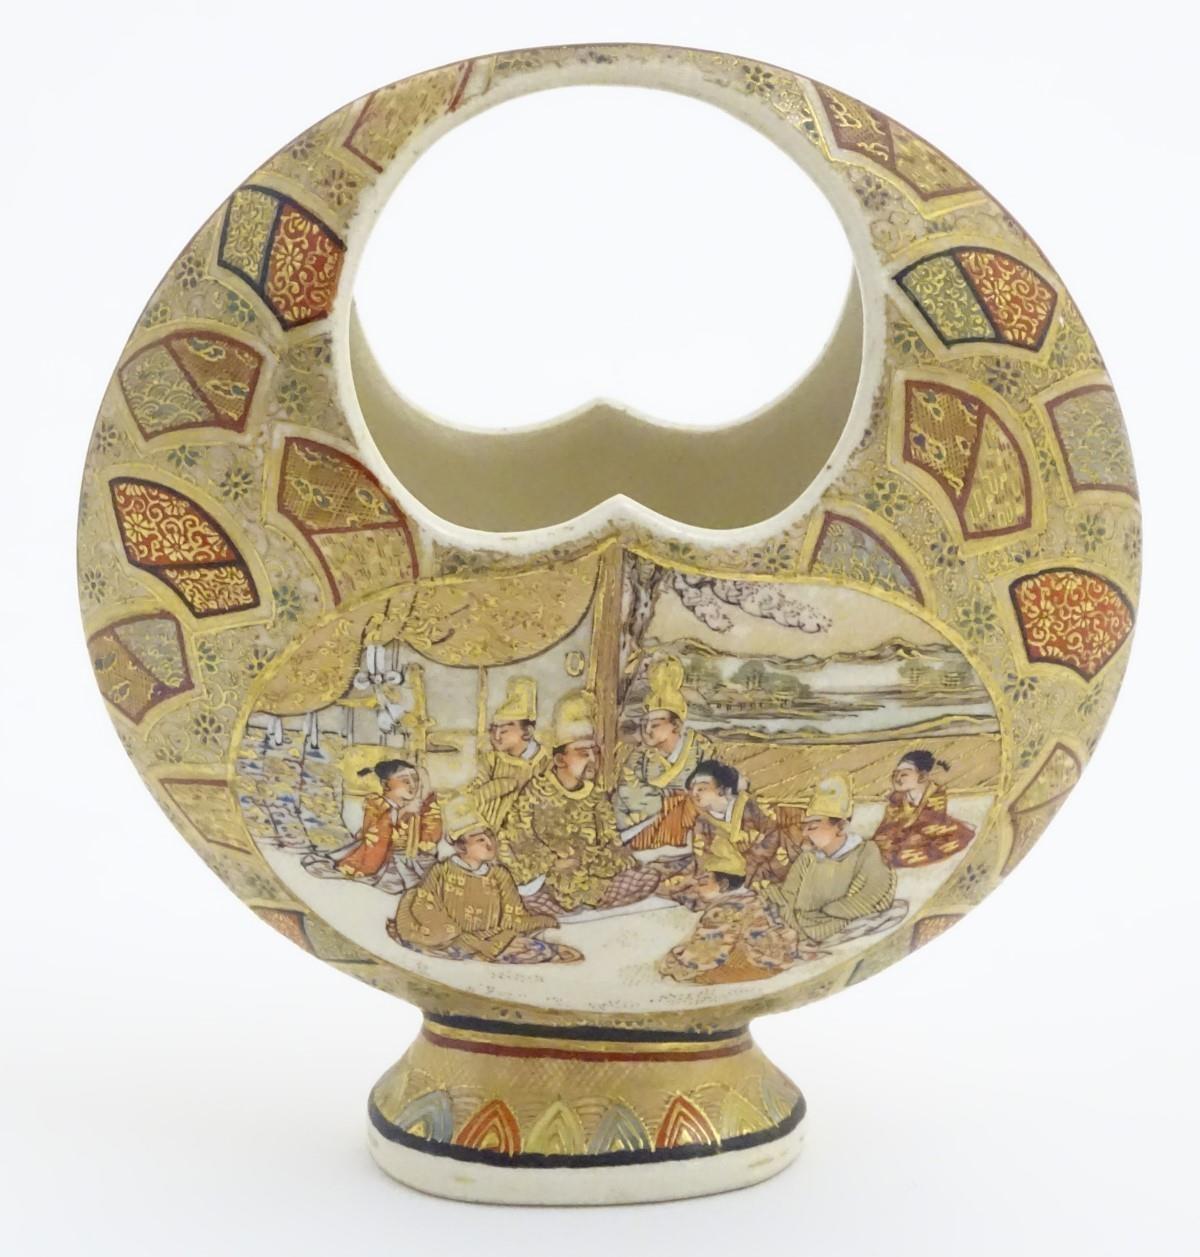 A Japanese satsuma moon basket vase with hand painted decoration depicting figures seated around - Image 9 of 20